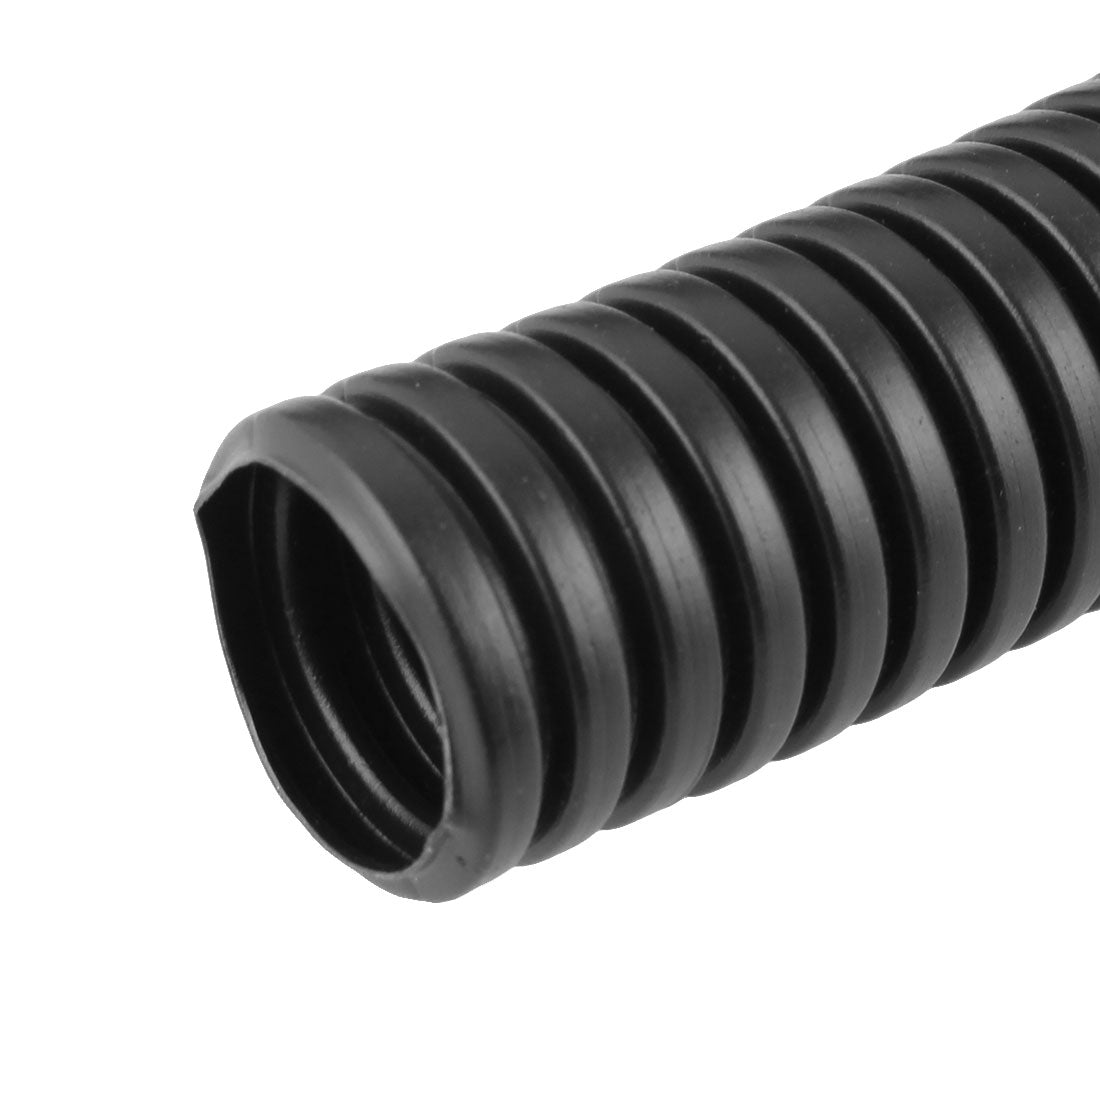 uxcell Uxcell 3.8 M 16 x 20 mm PVC Flexible Corrugated Conduit Tube for Garden,Office Black